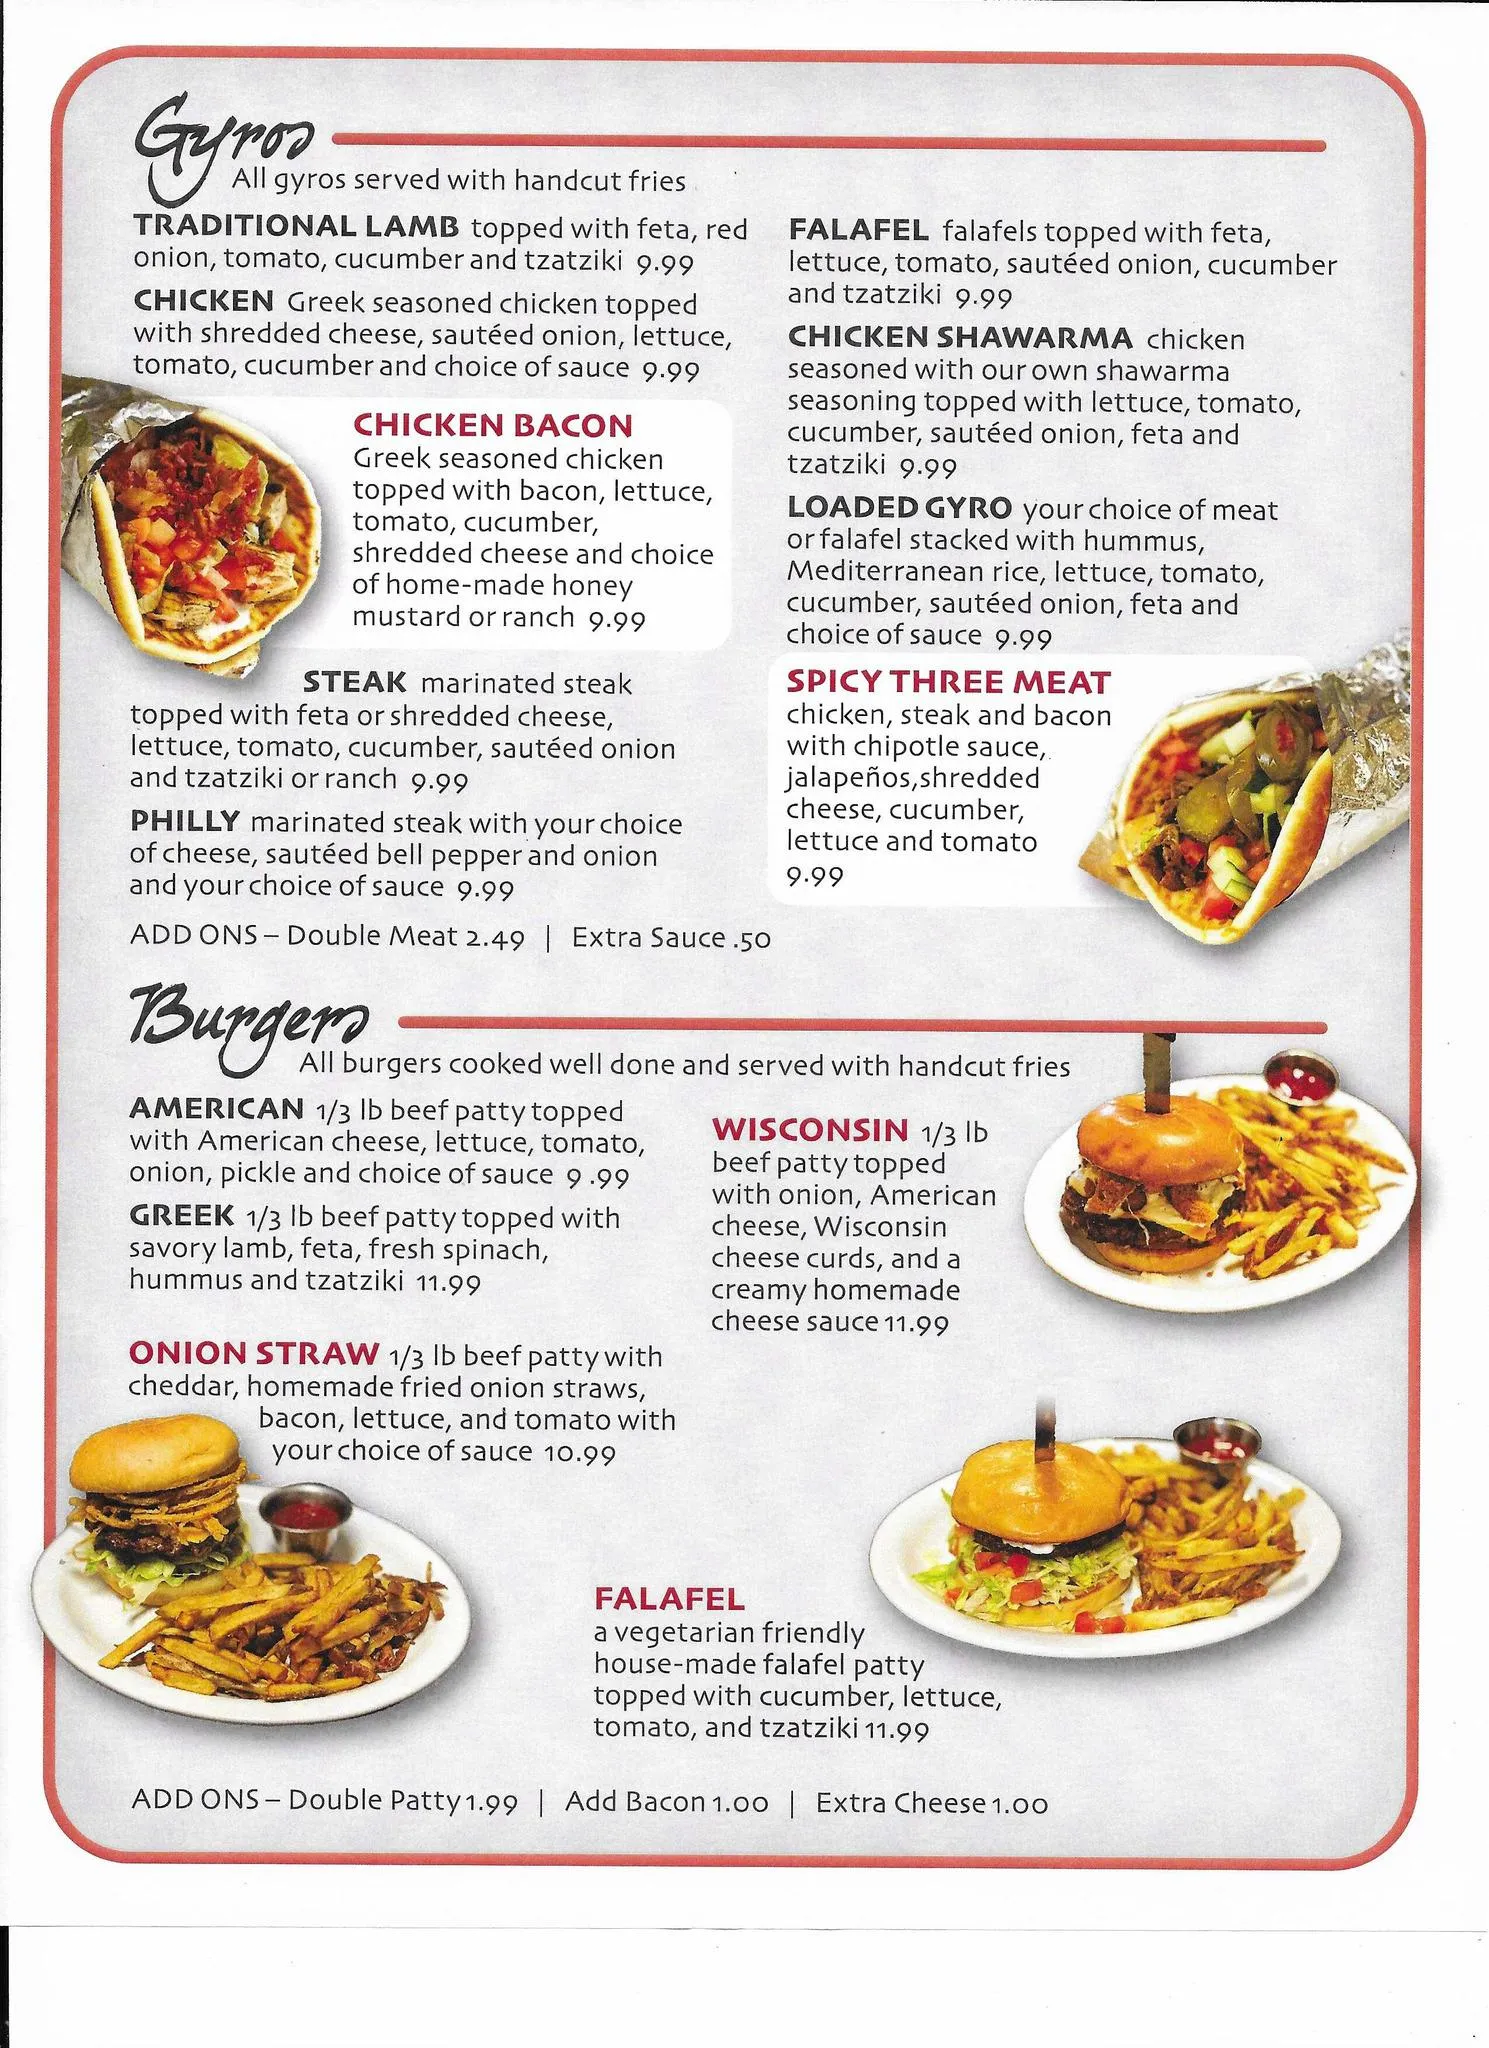 Foodies Restaurant and Grill menu gyros page.